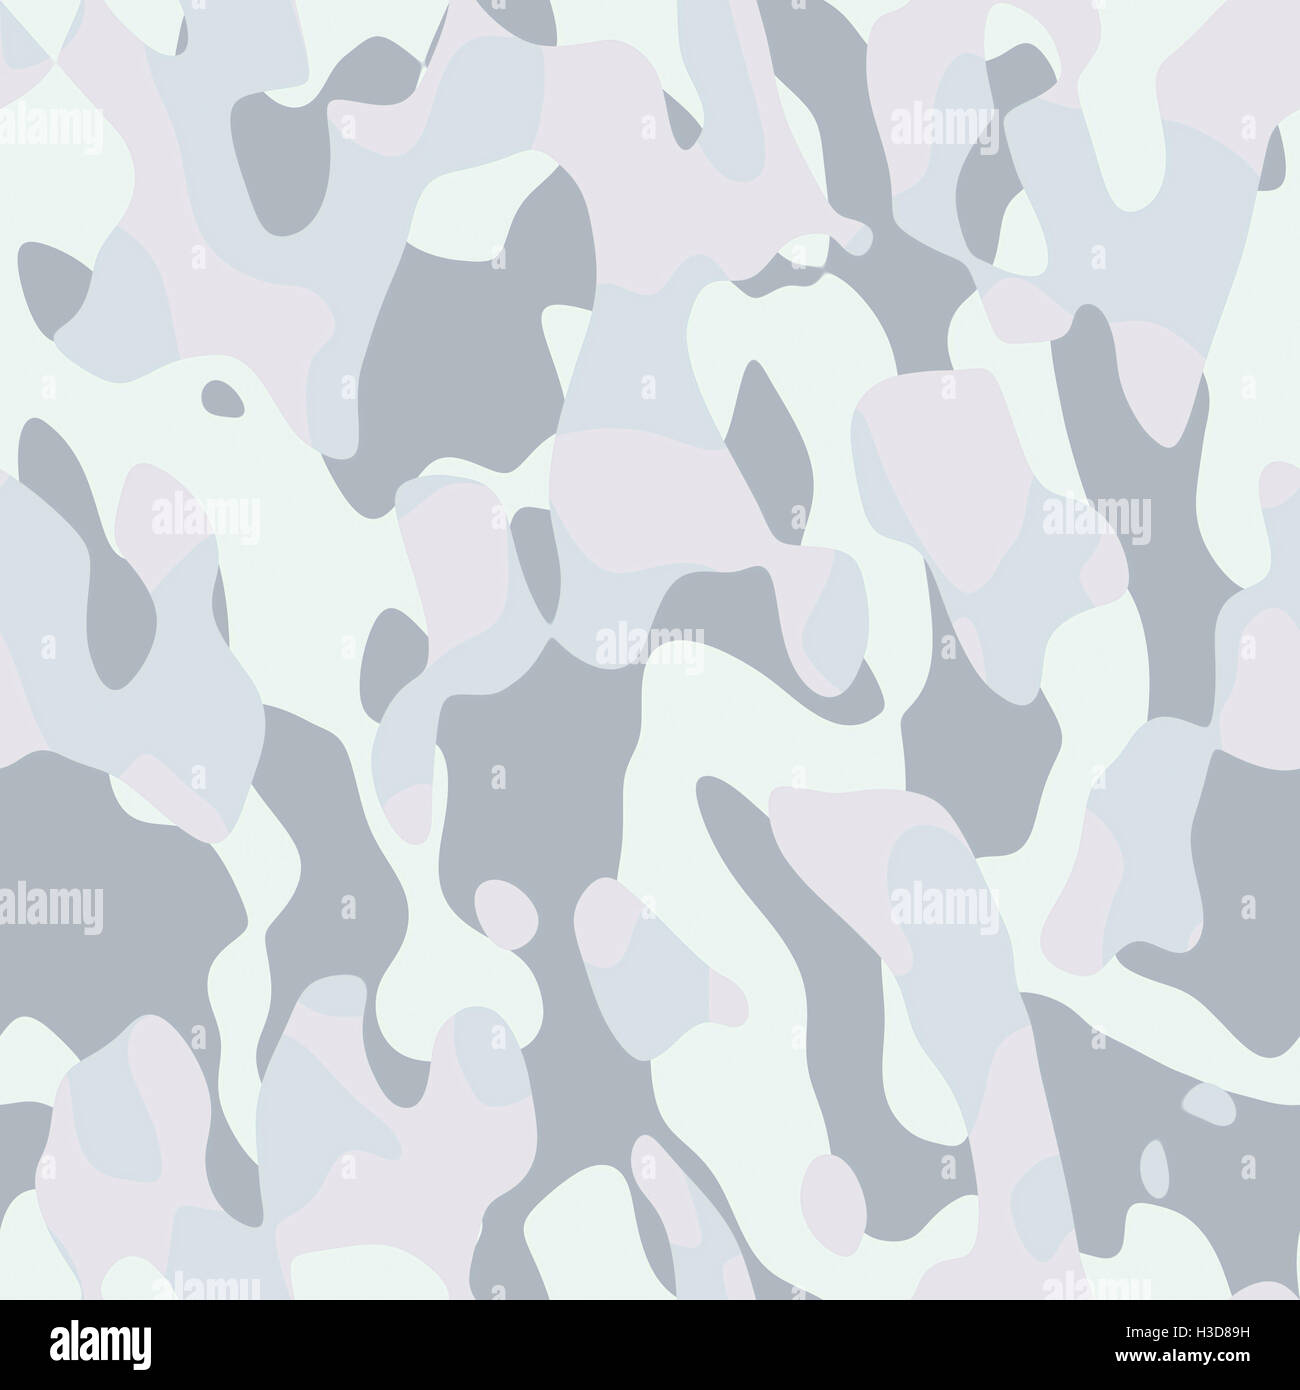 Abstract camo pattern - digitally generated image Stock Photo